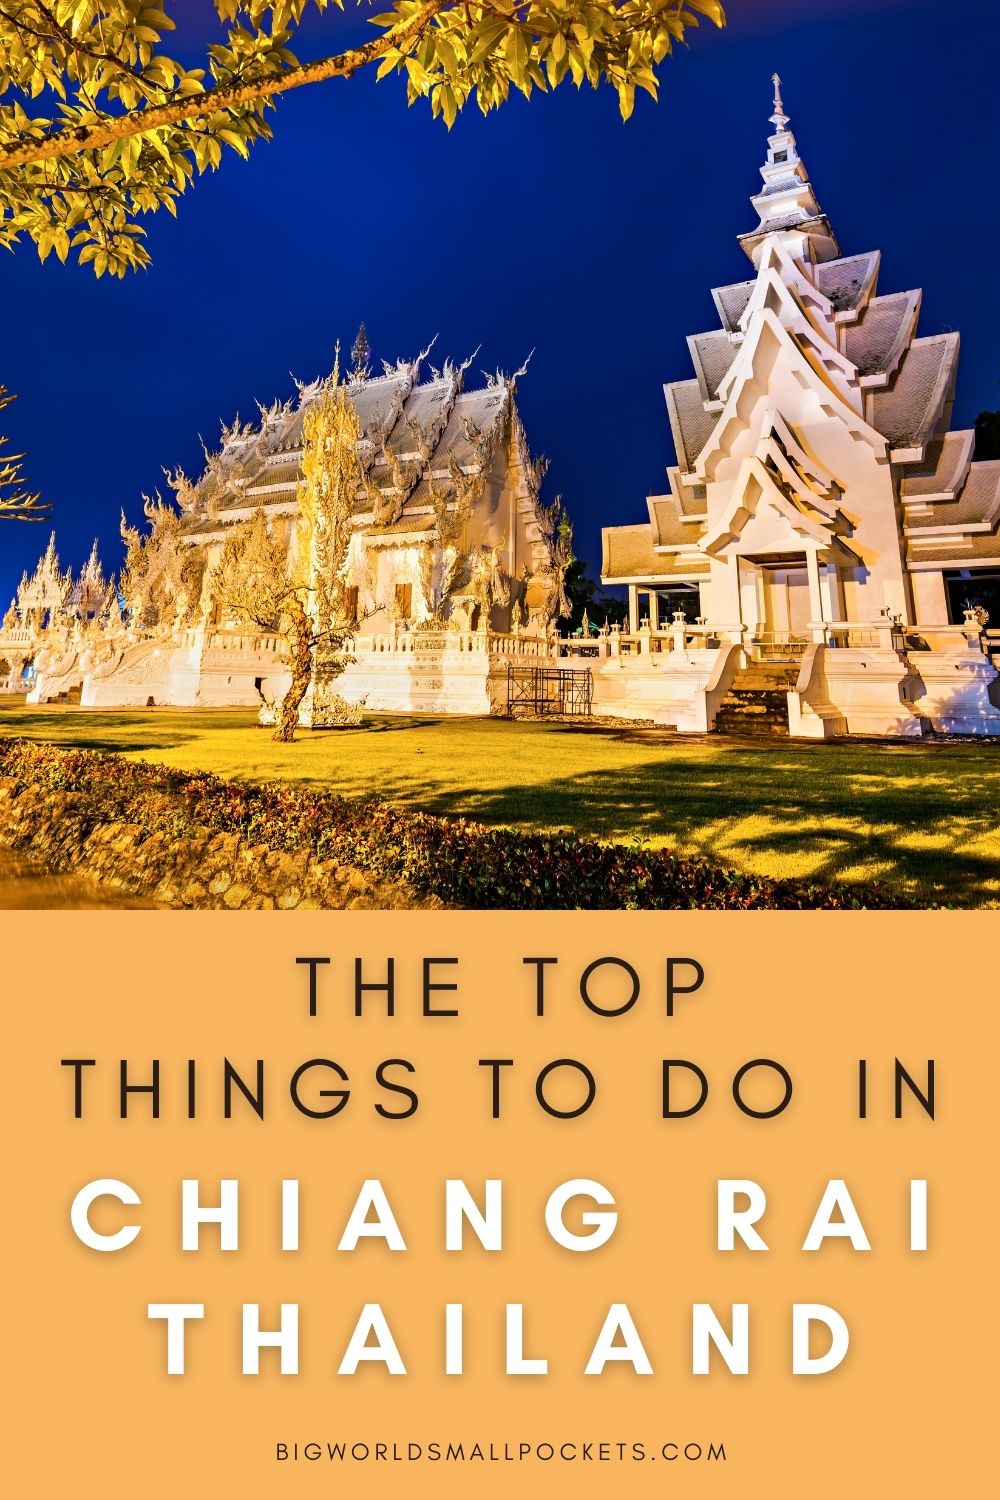 The Best Things to Do in Chiang Rai, Thailand